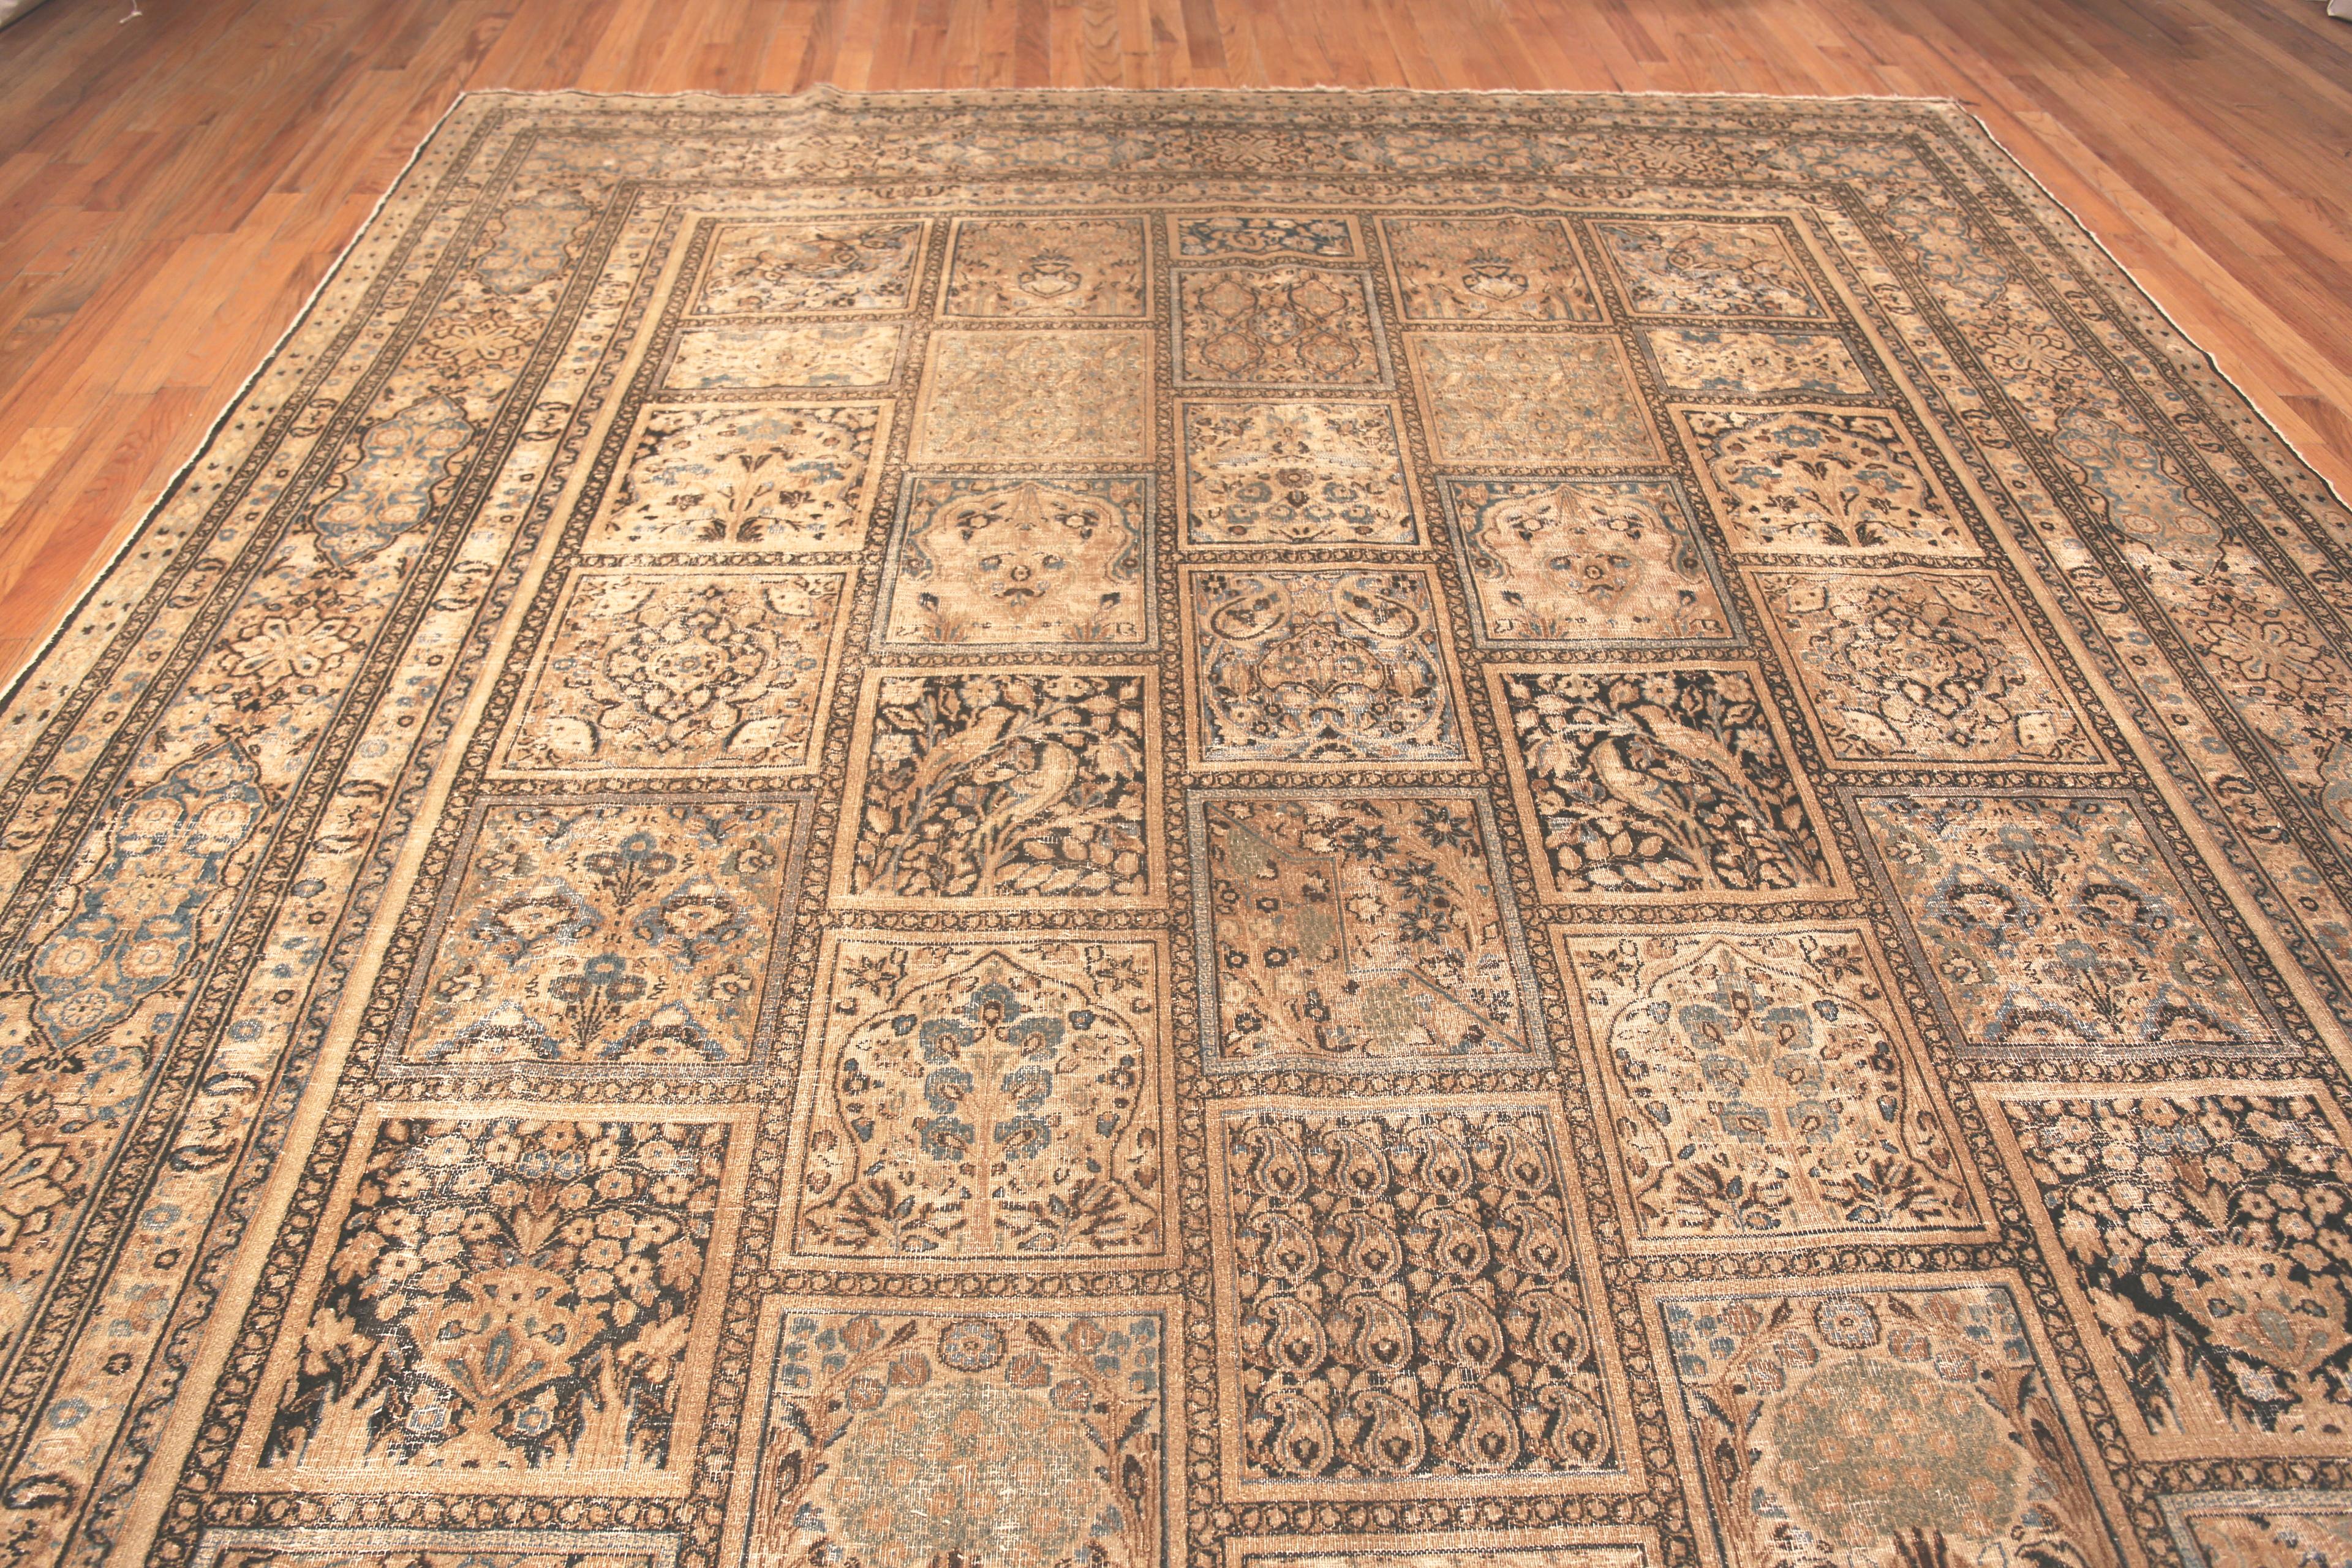 Large Garden Design Antique Persian Shabby Chic Khorassan Rug. Country of origin: Persia, Circa date: 1920. Size: 11 ft 4 in x 16 ft 9 in (3.45 m x 5.11 m)

